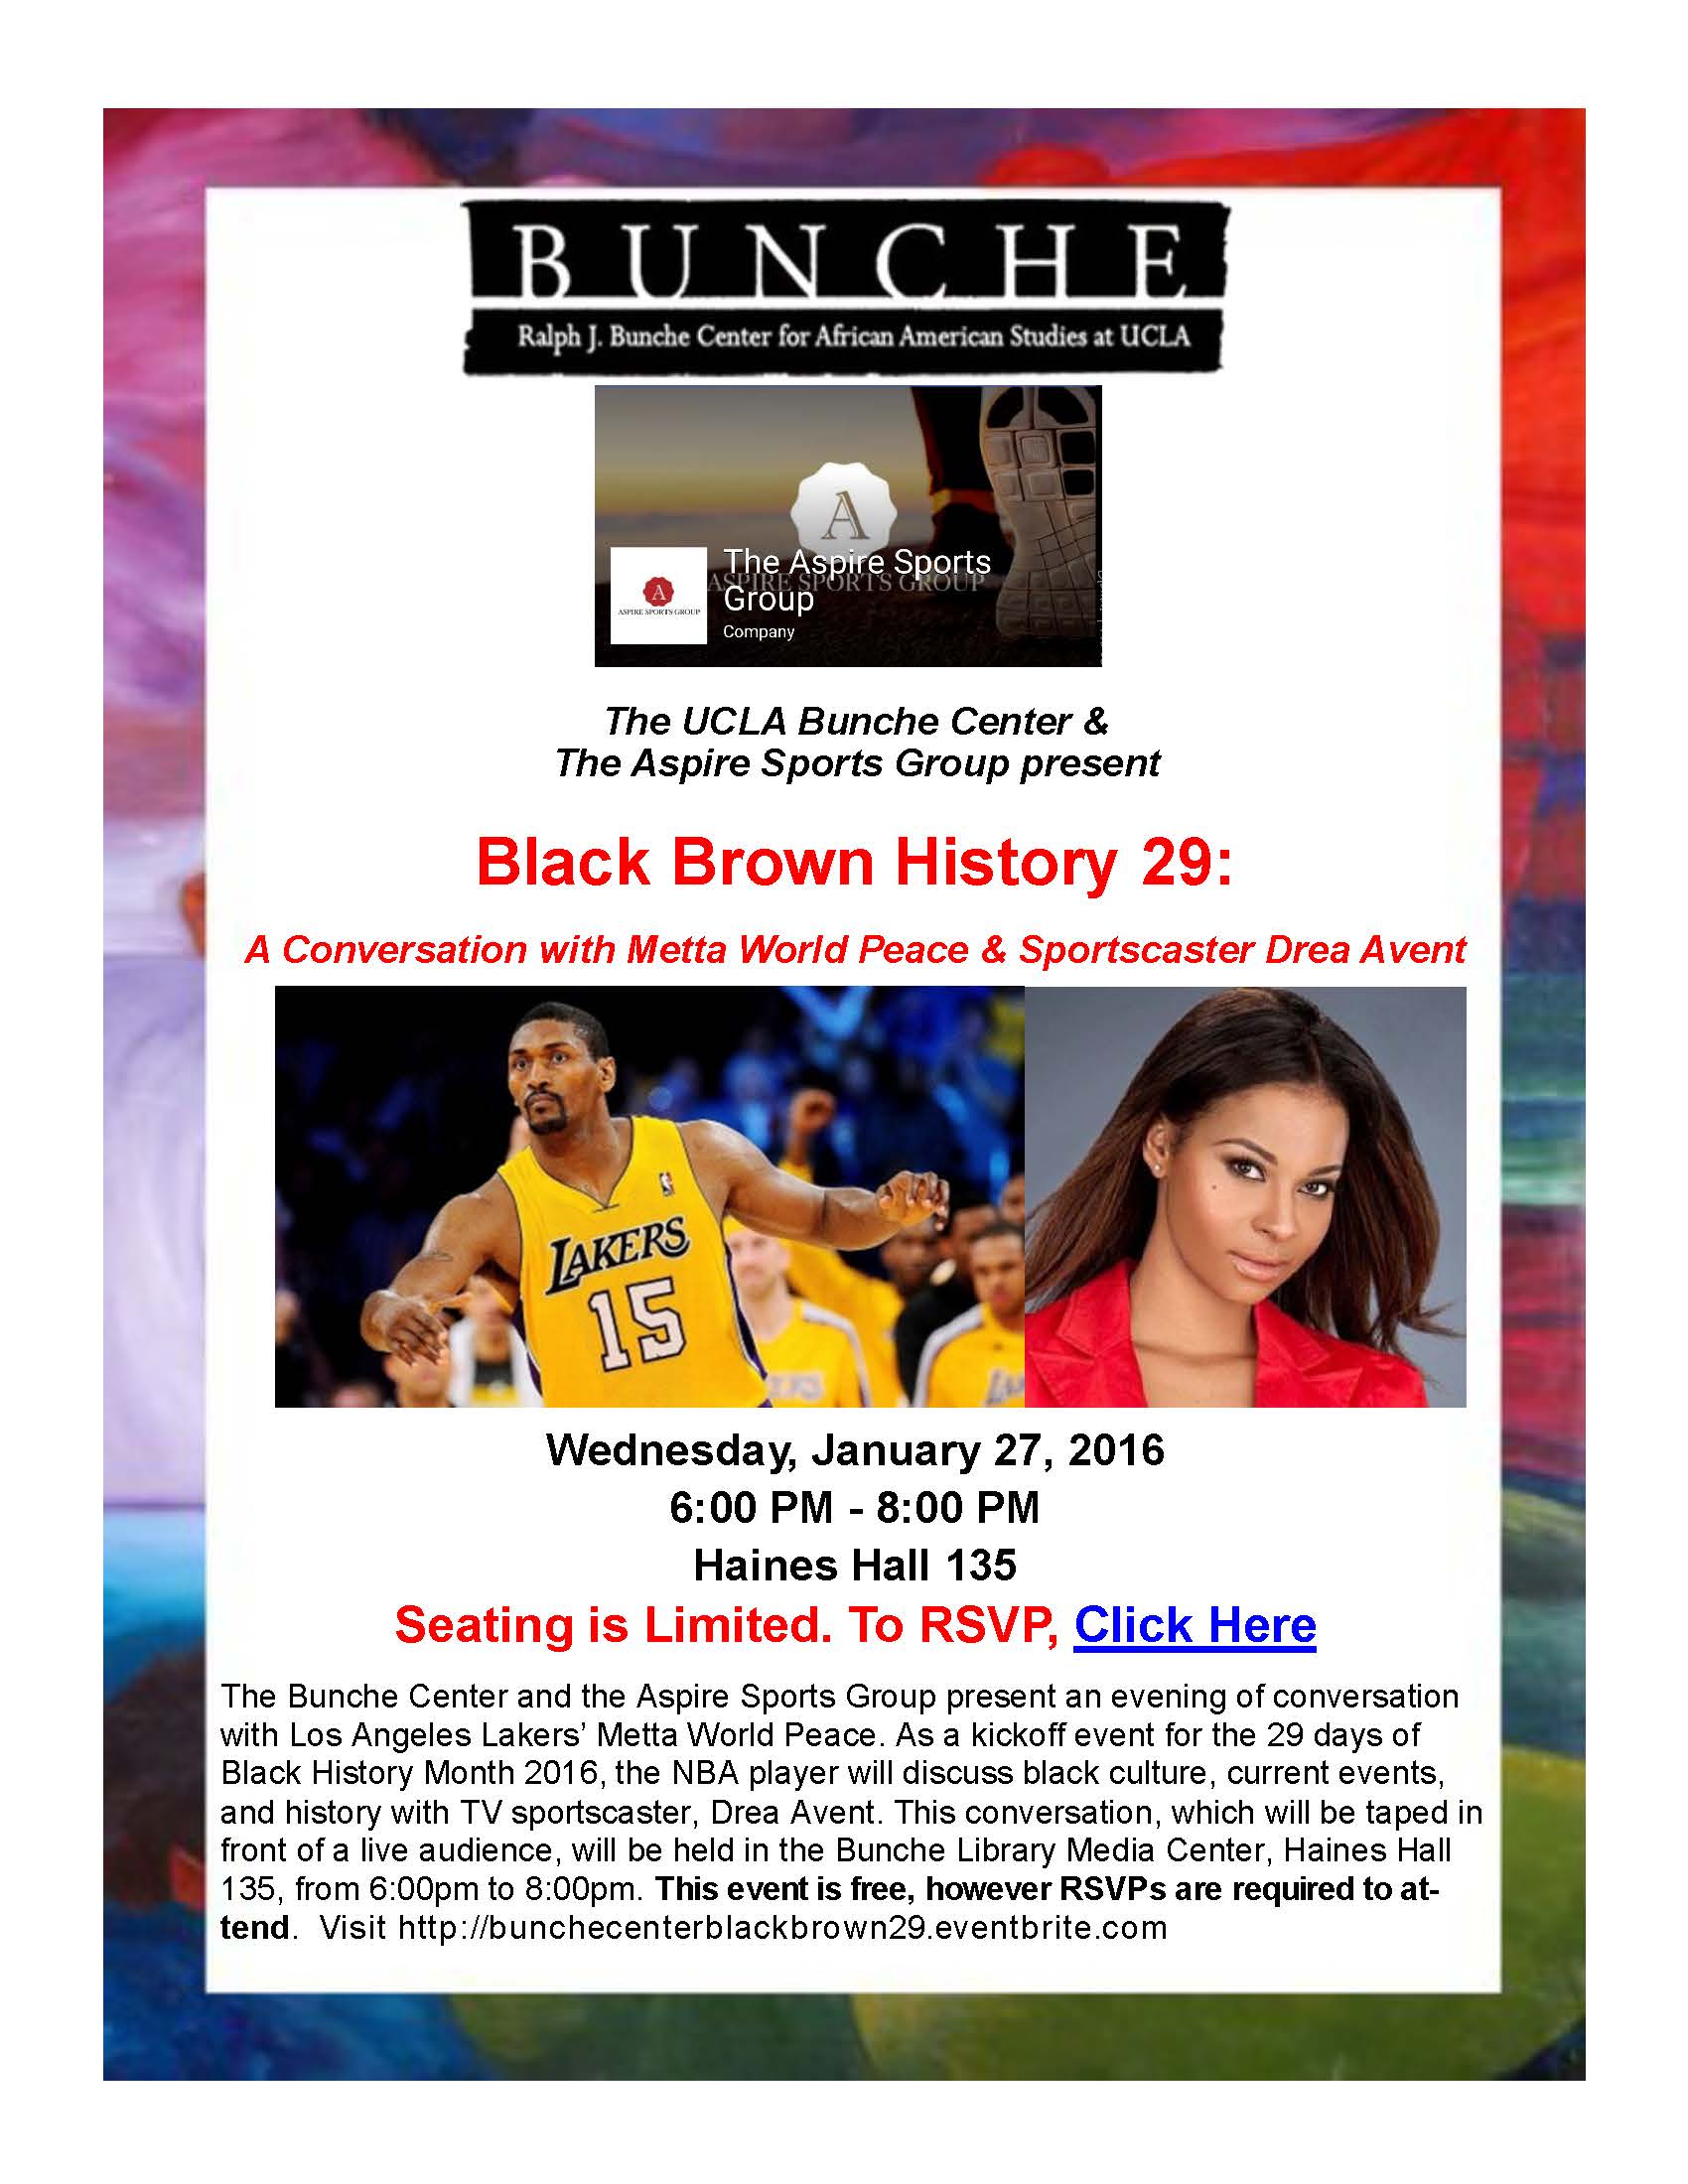 Lakers' Metta World Peace Kicks Off Black History Month at the Bunche  Center 1/27/16